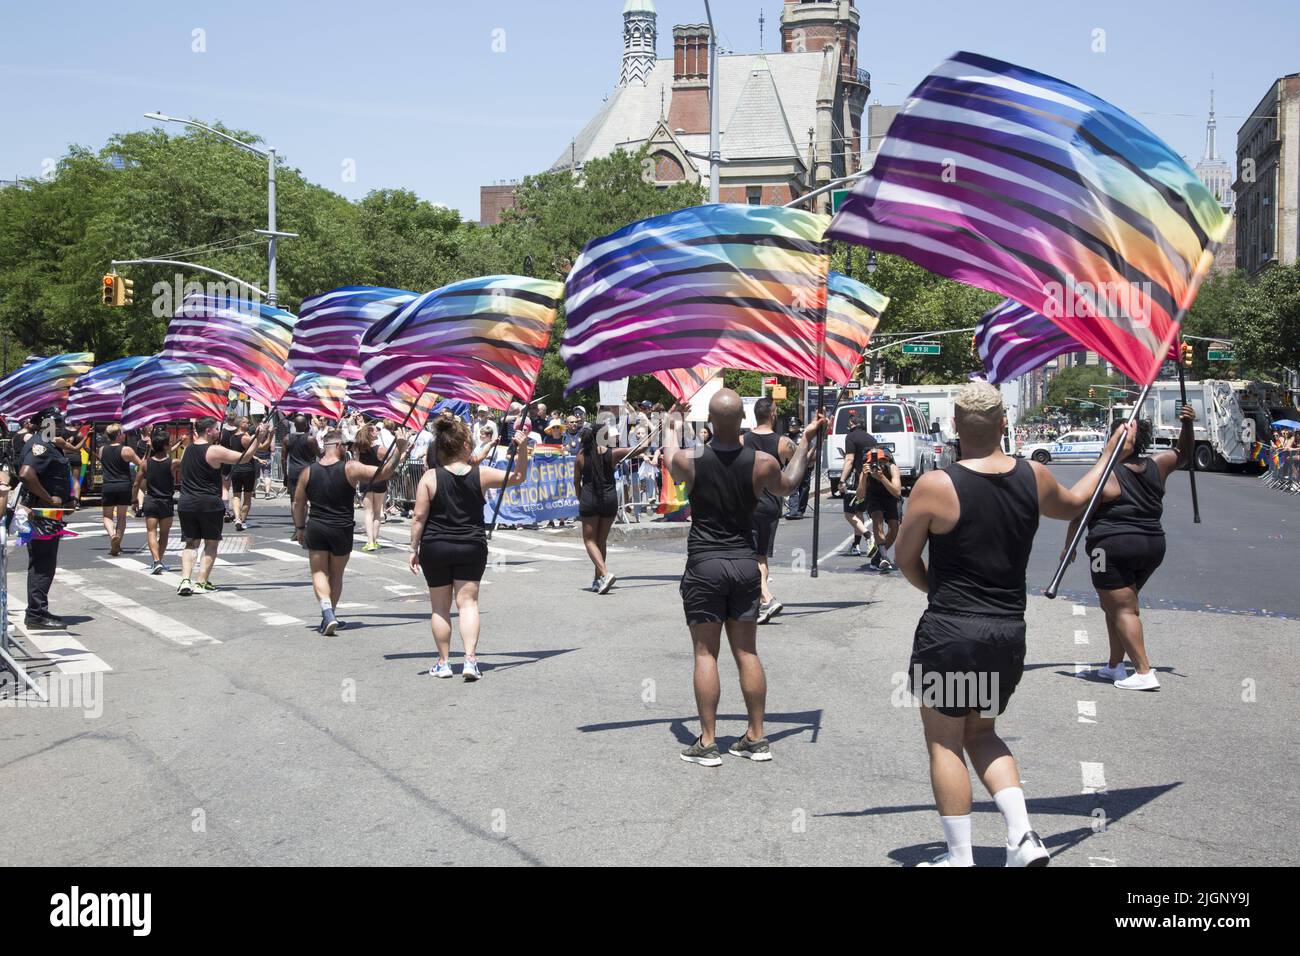 The annual Gay Pride Parade returns to march down 5th Avenue  and end up on Christopher Street in Greenwich Village after a 3 year break due to the Covid-19 pandemic. Group of flag dancers crossing 6th Ave, to Christopher Street. Stock Photo